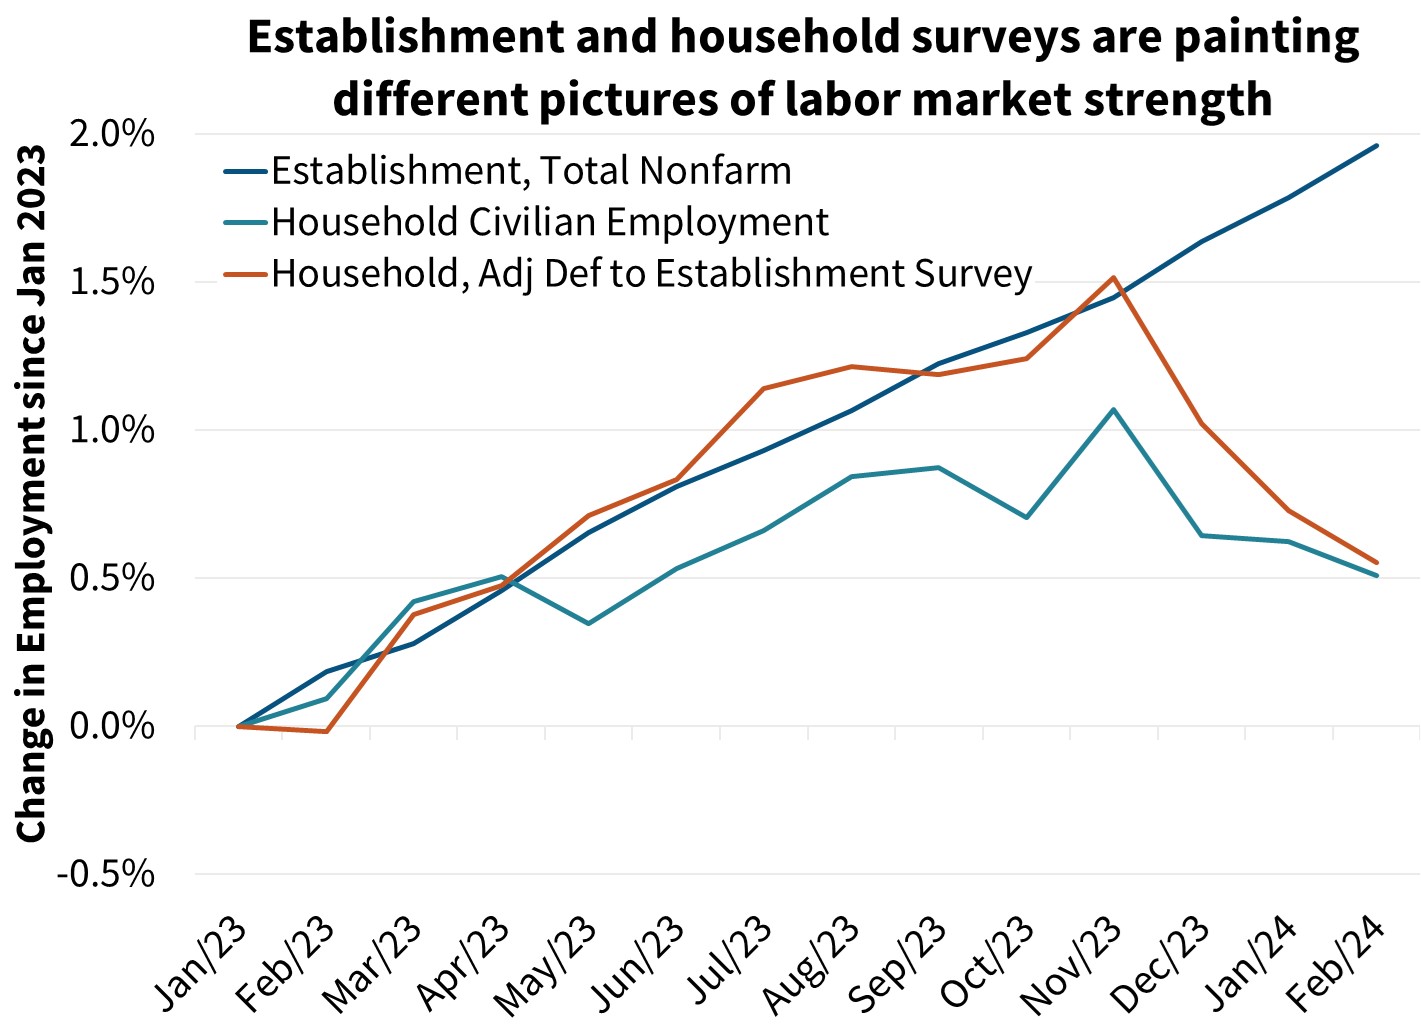 Establishment and household surveys are painting different pictures of labor market strength